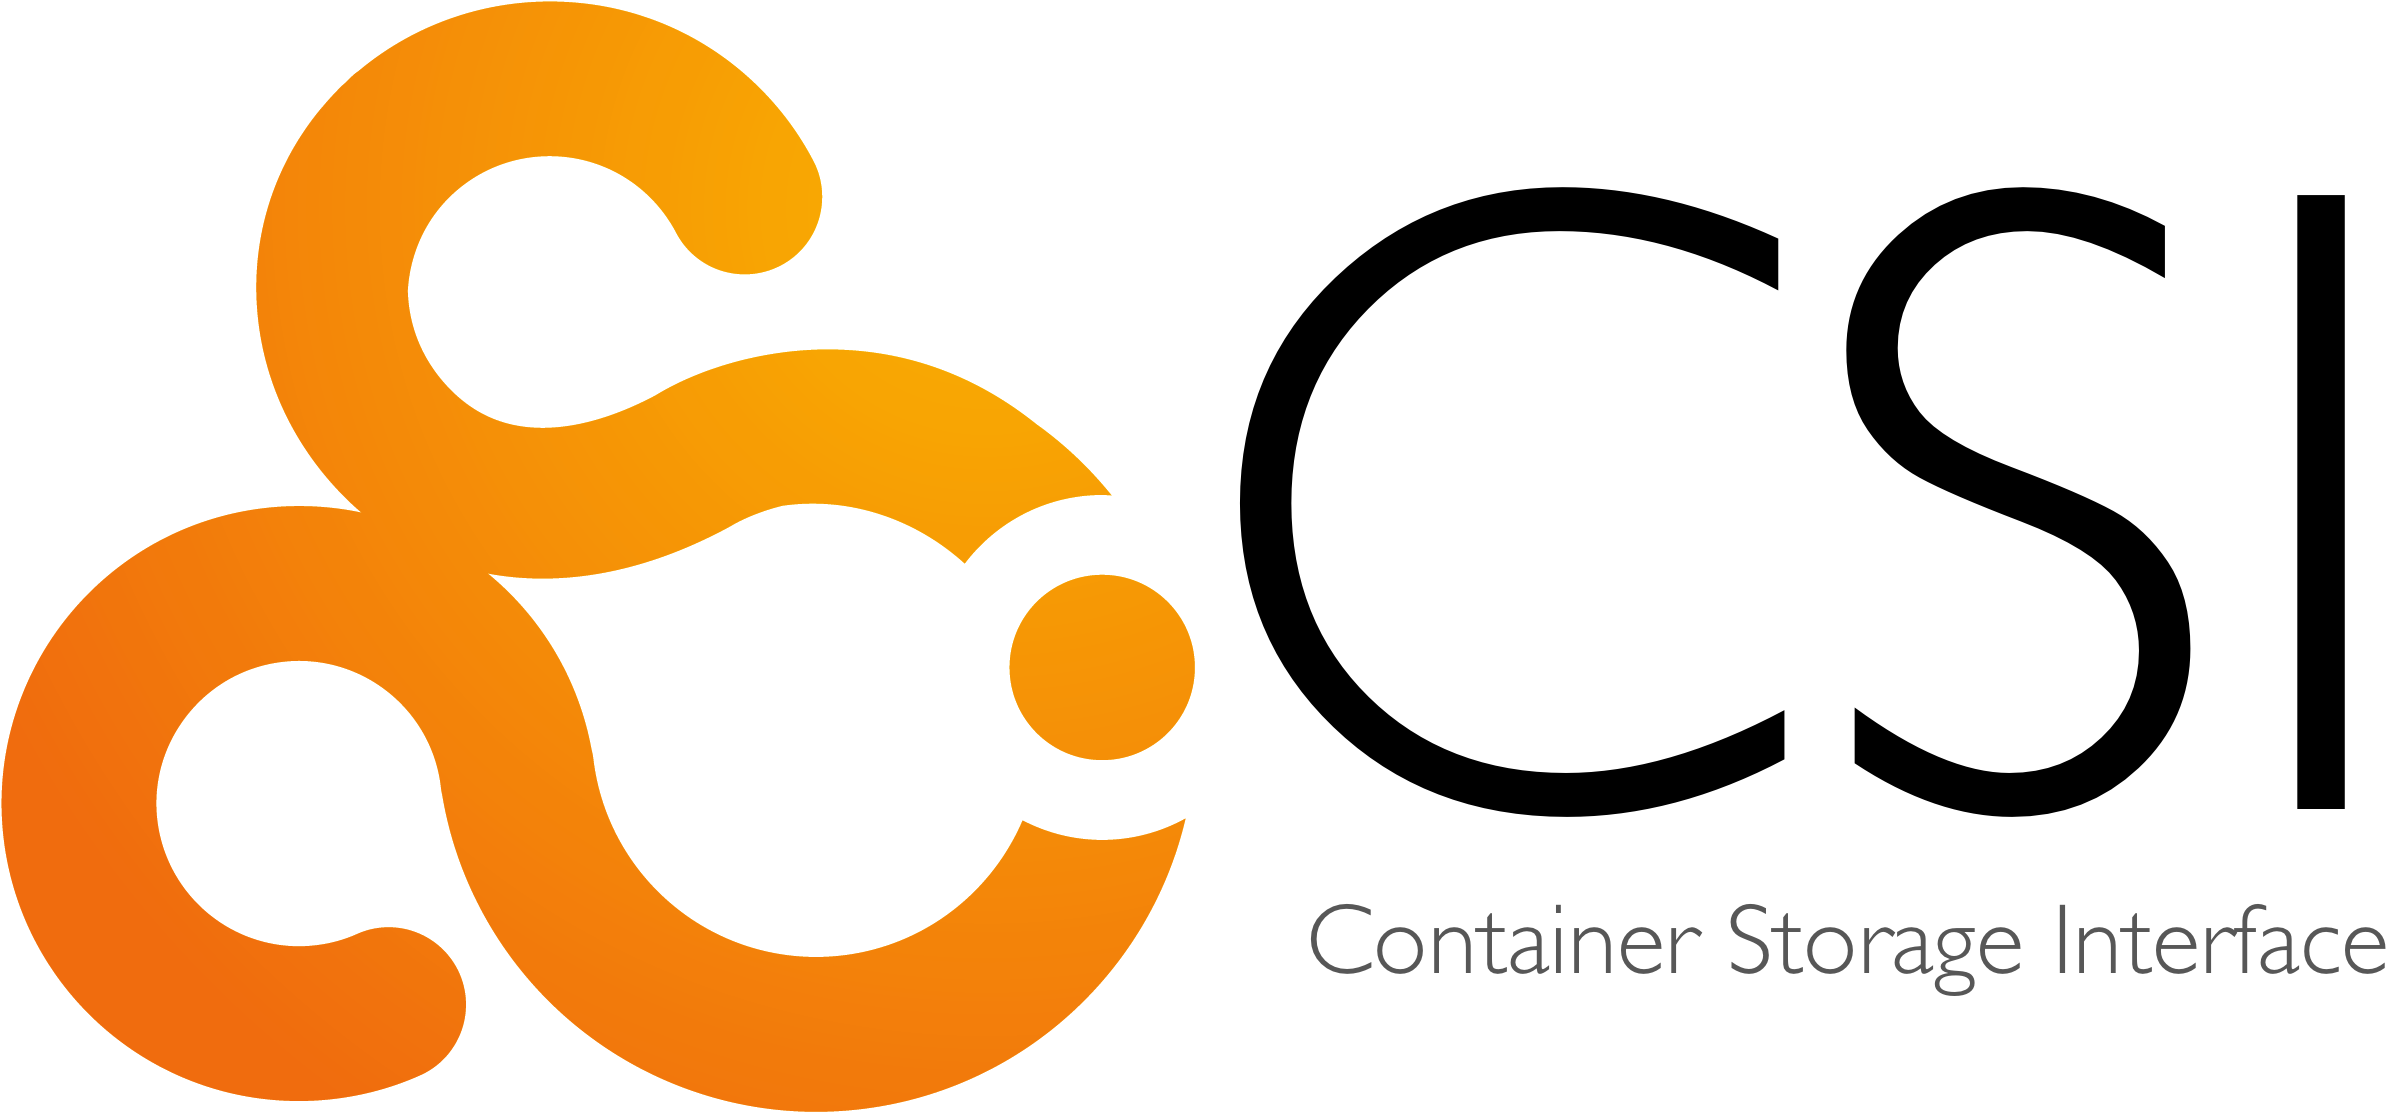 How To Write A Container Storage Interface Plugin - Container Security Initiative (2500x1251)